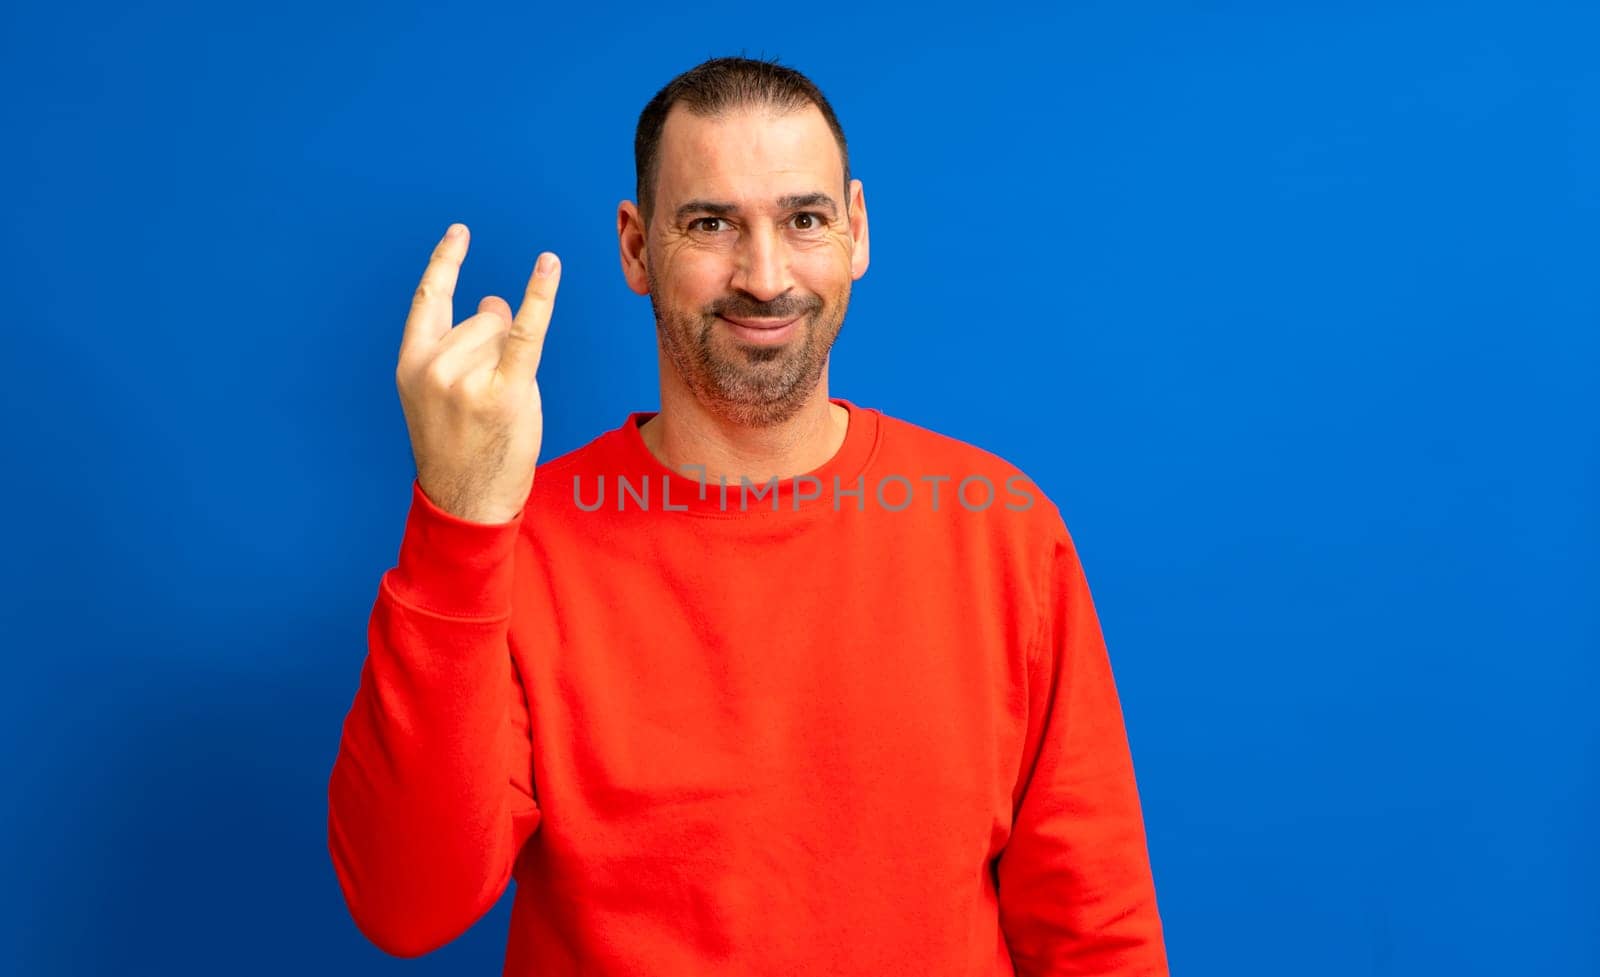 Hispanic man with beard in his 40s wearing a red sweatshirt doing rock gesture on blue studio background by Barriolo82